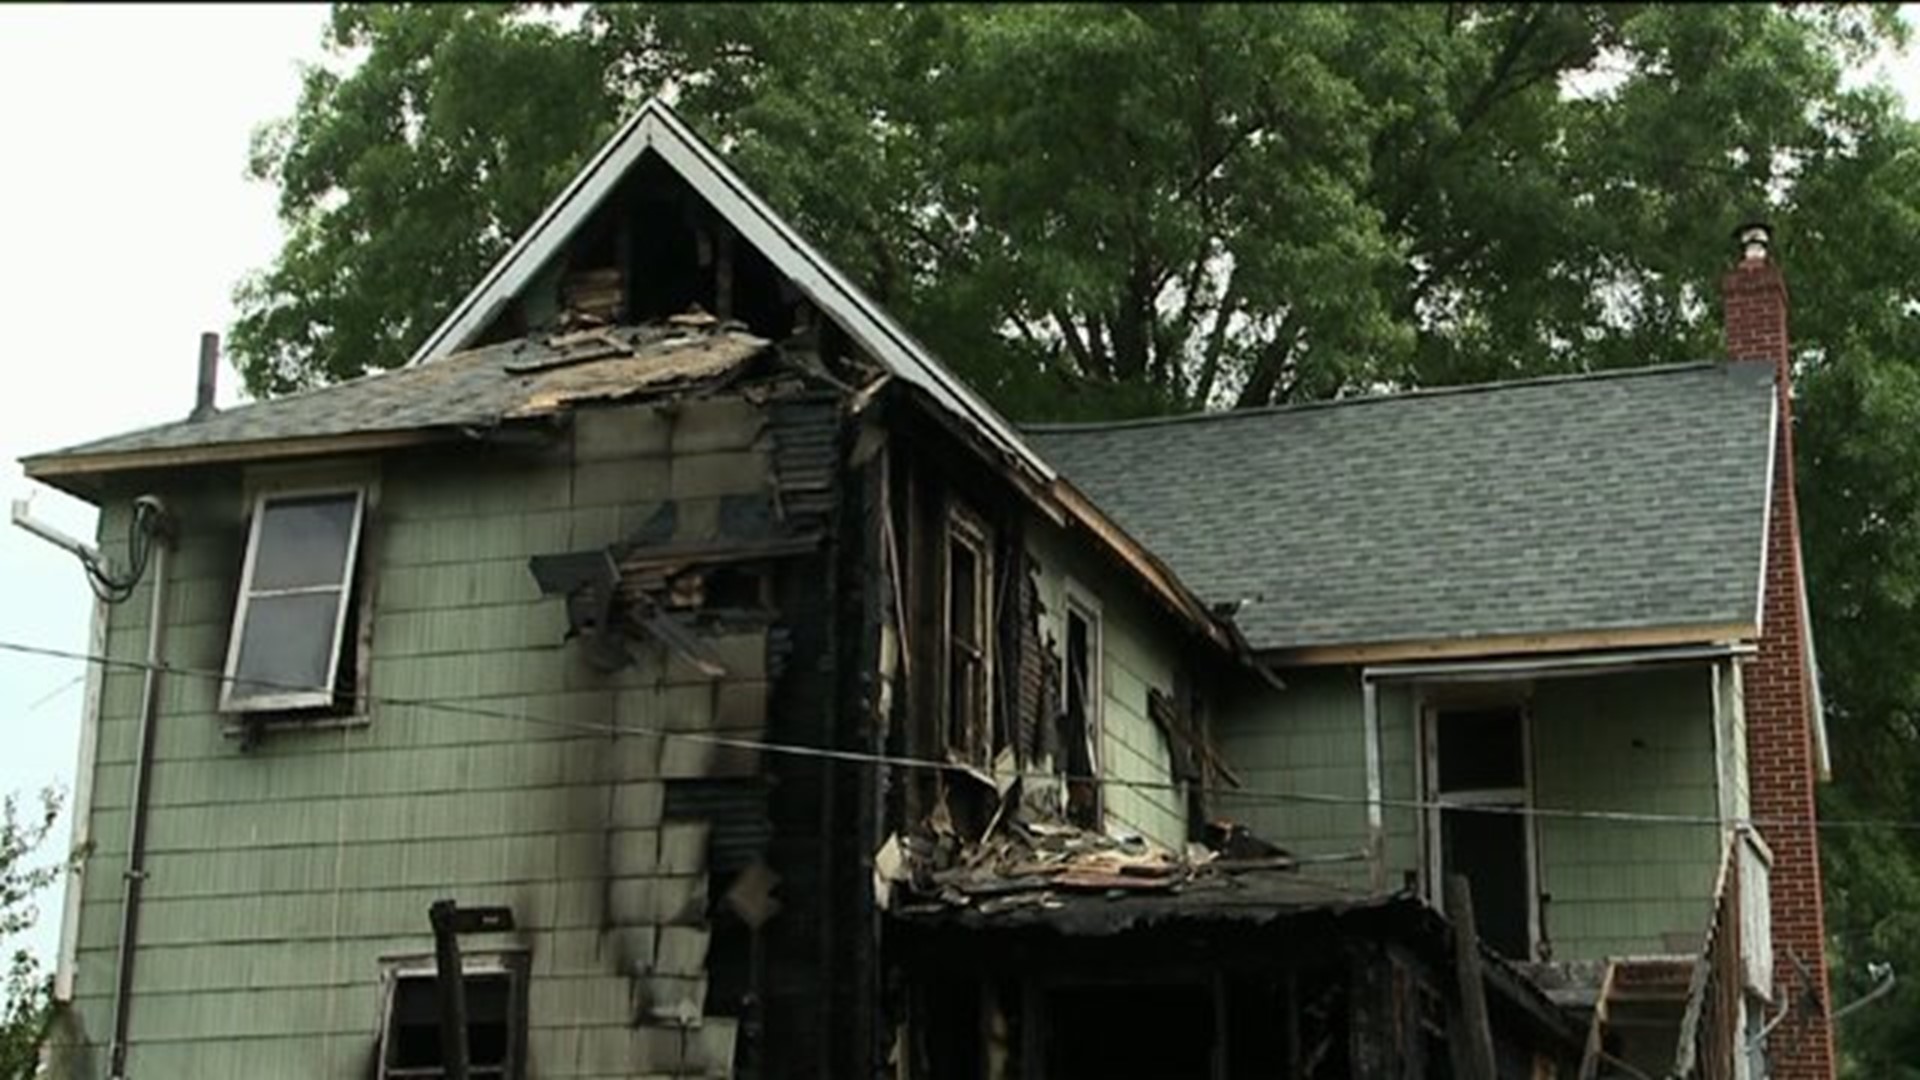 Neighbors Rushed to Help Victims in Deadly Fire